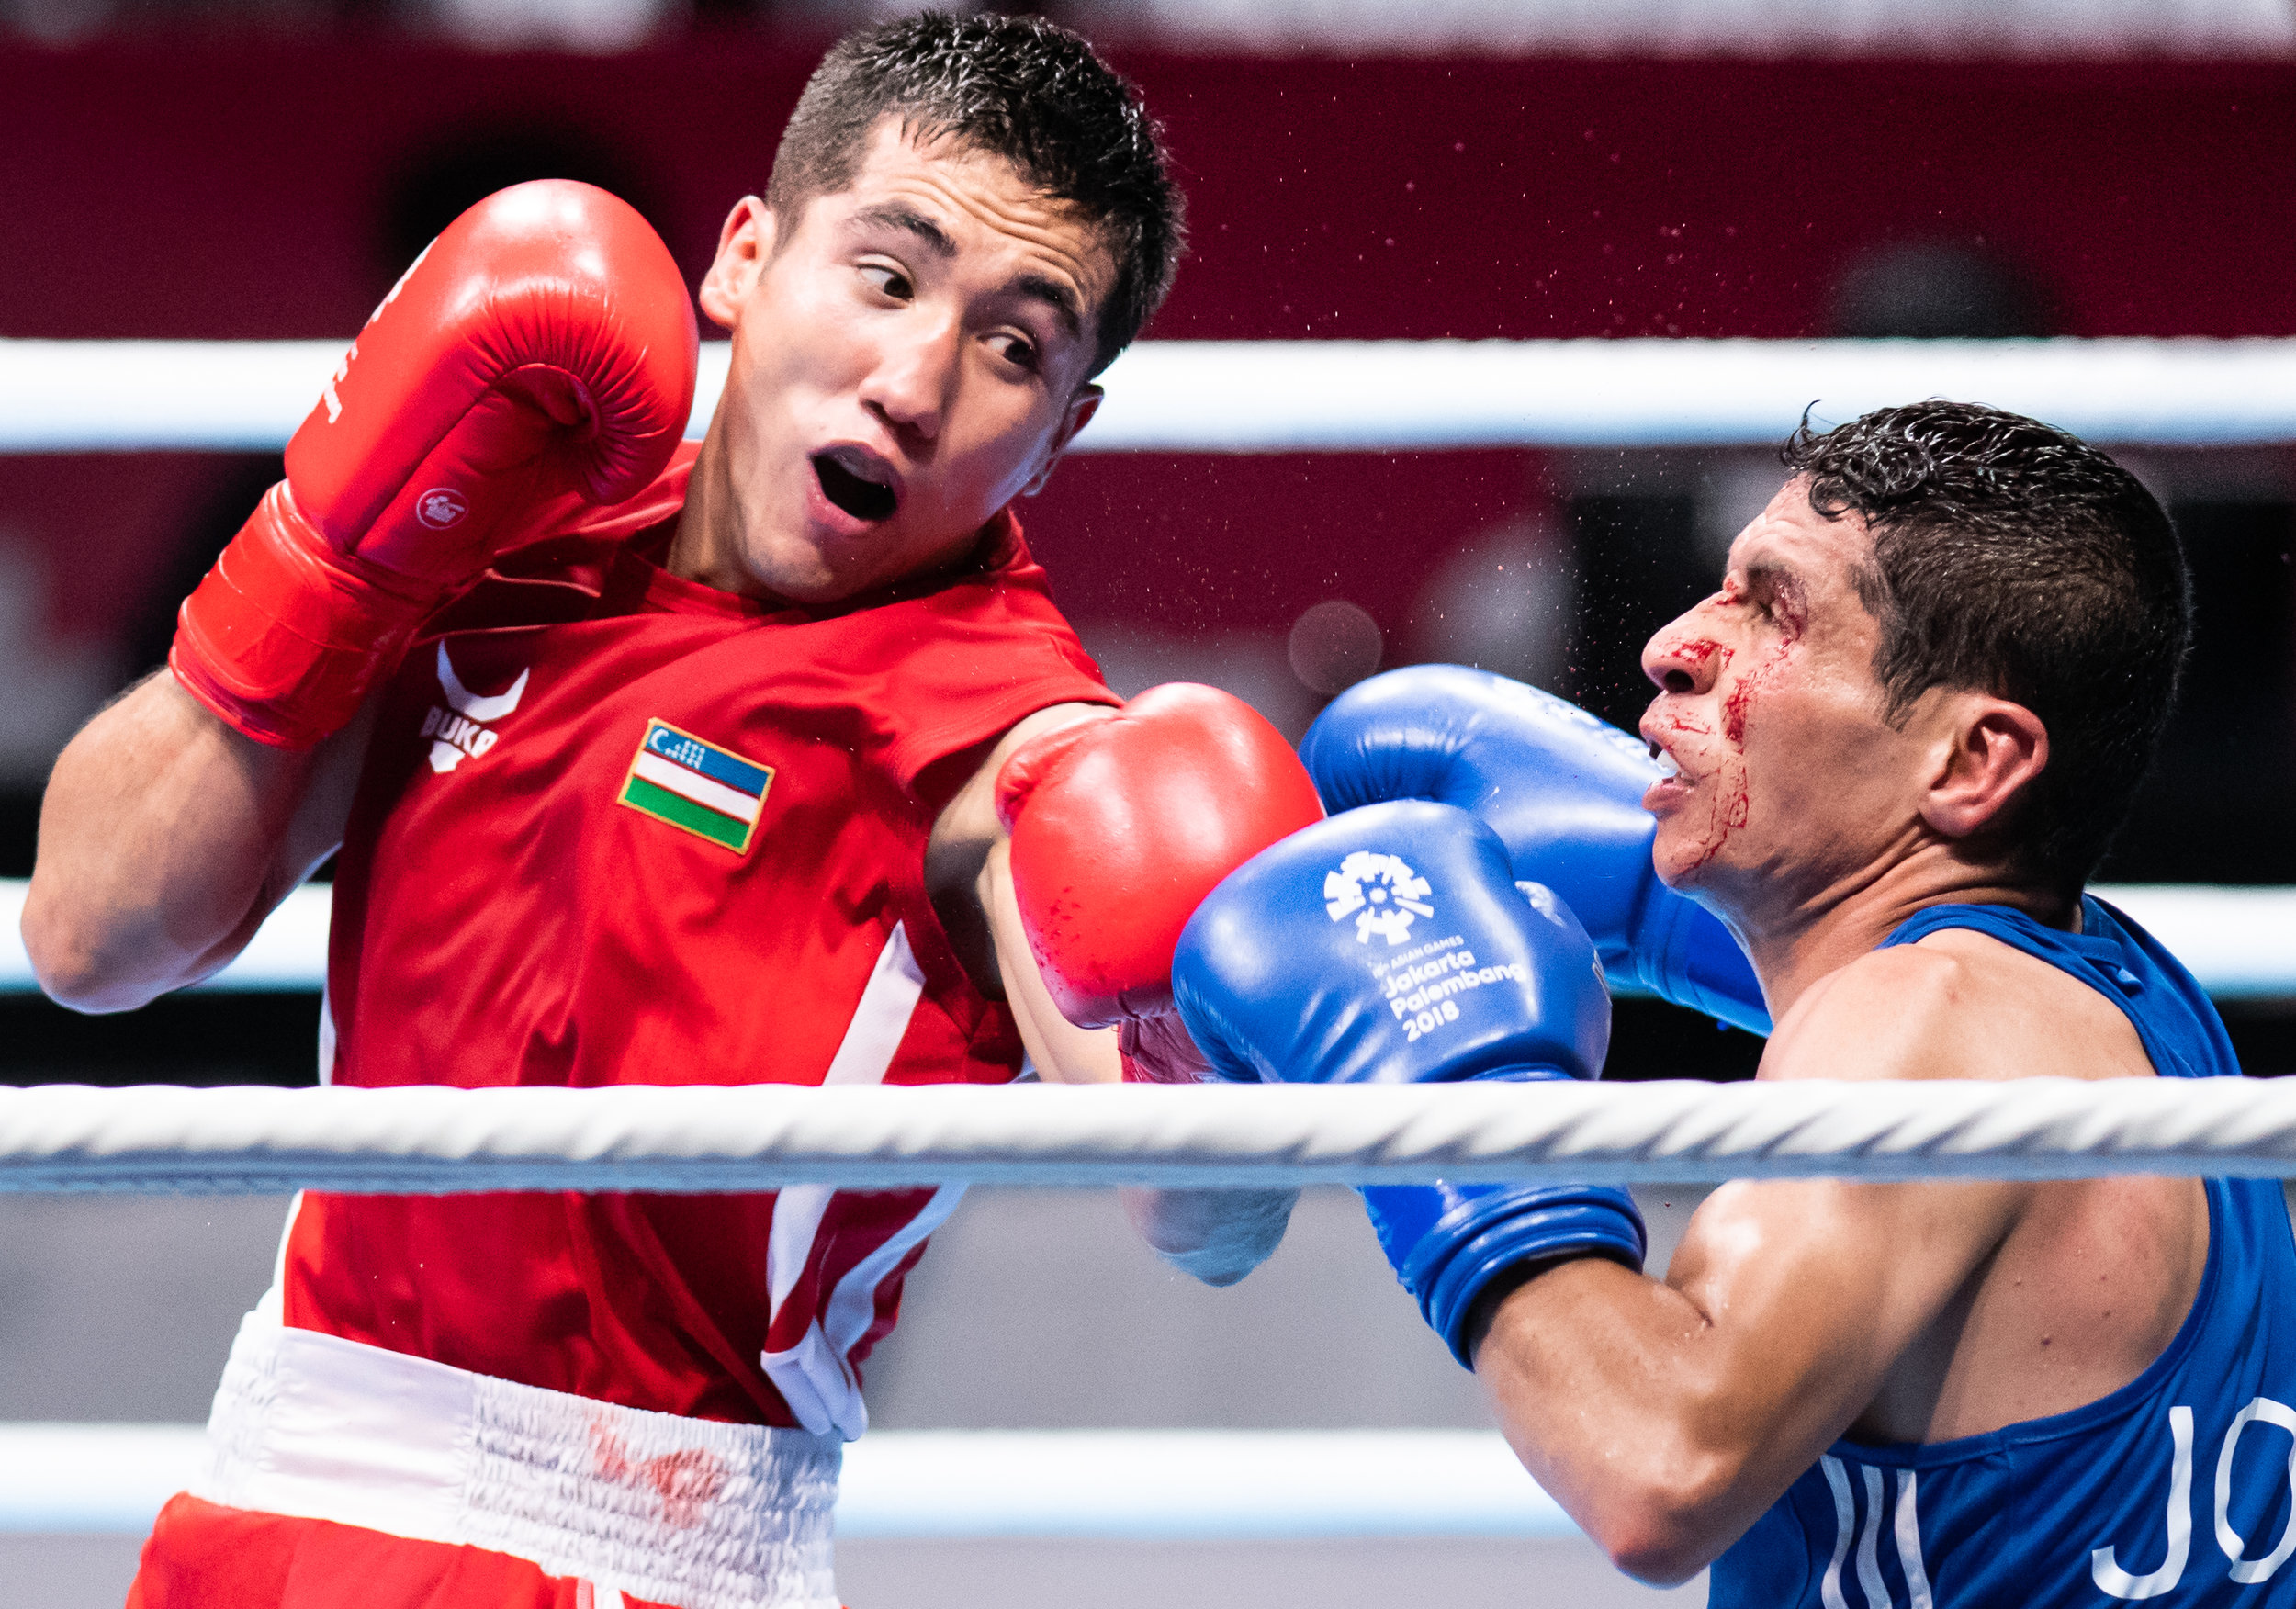 An Uzbek boxer punches his Jordanian opponent during the Bantam Weight match of the Asian Games at the Jakarta International Expo.